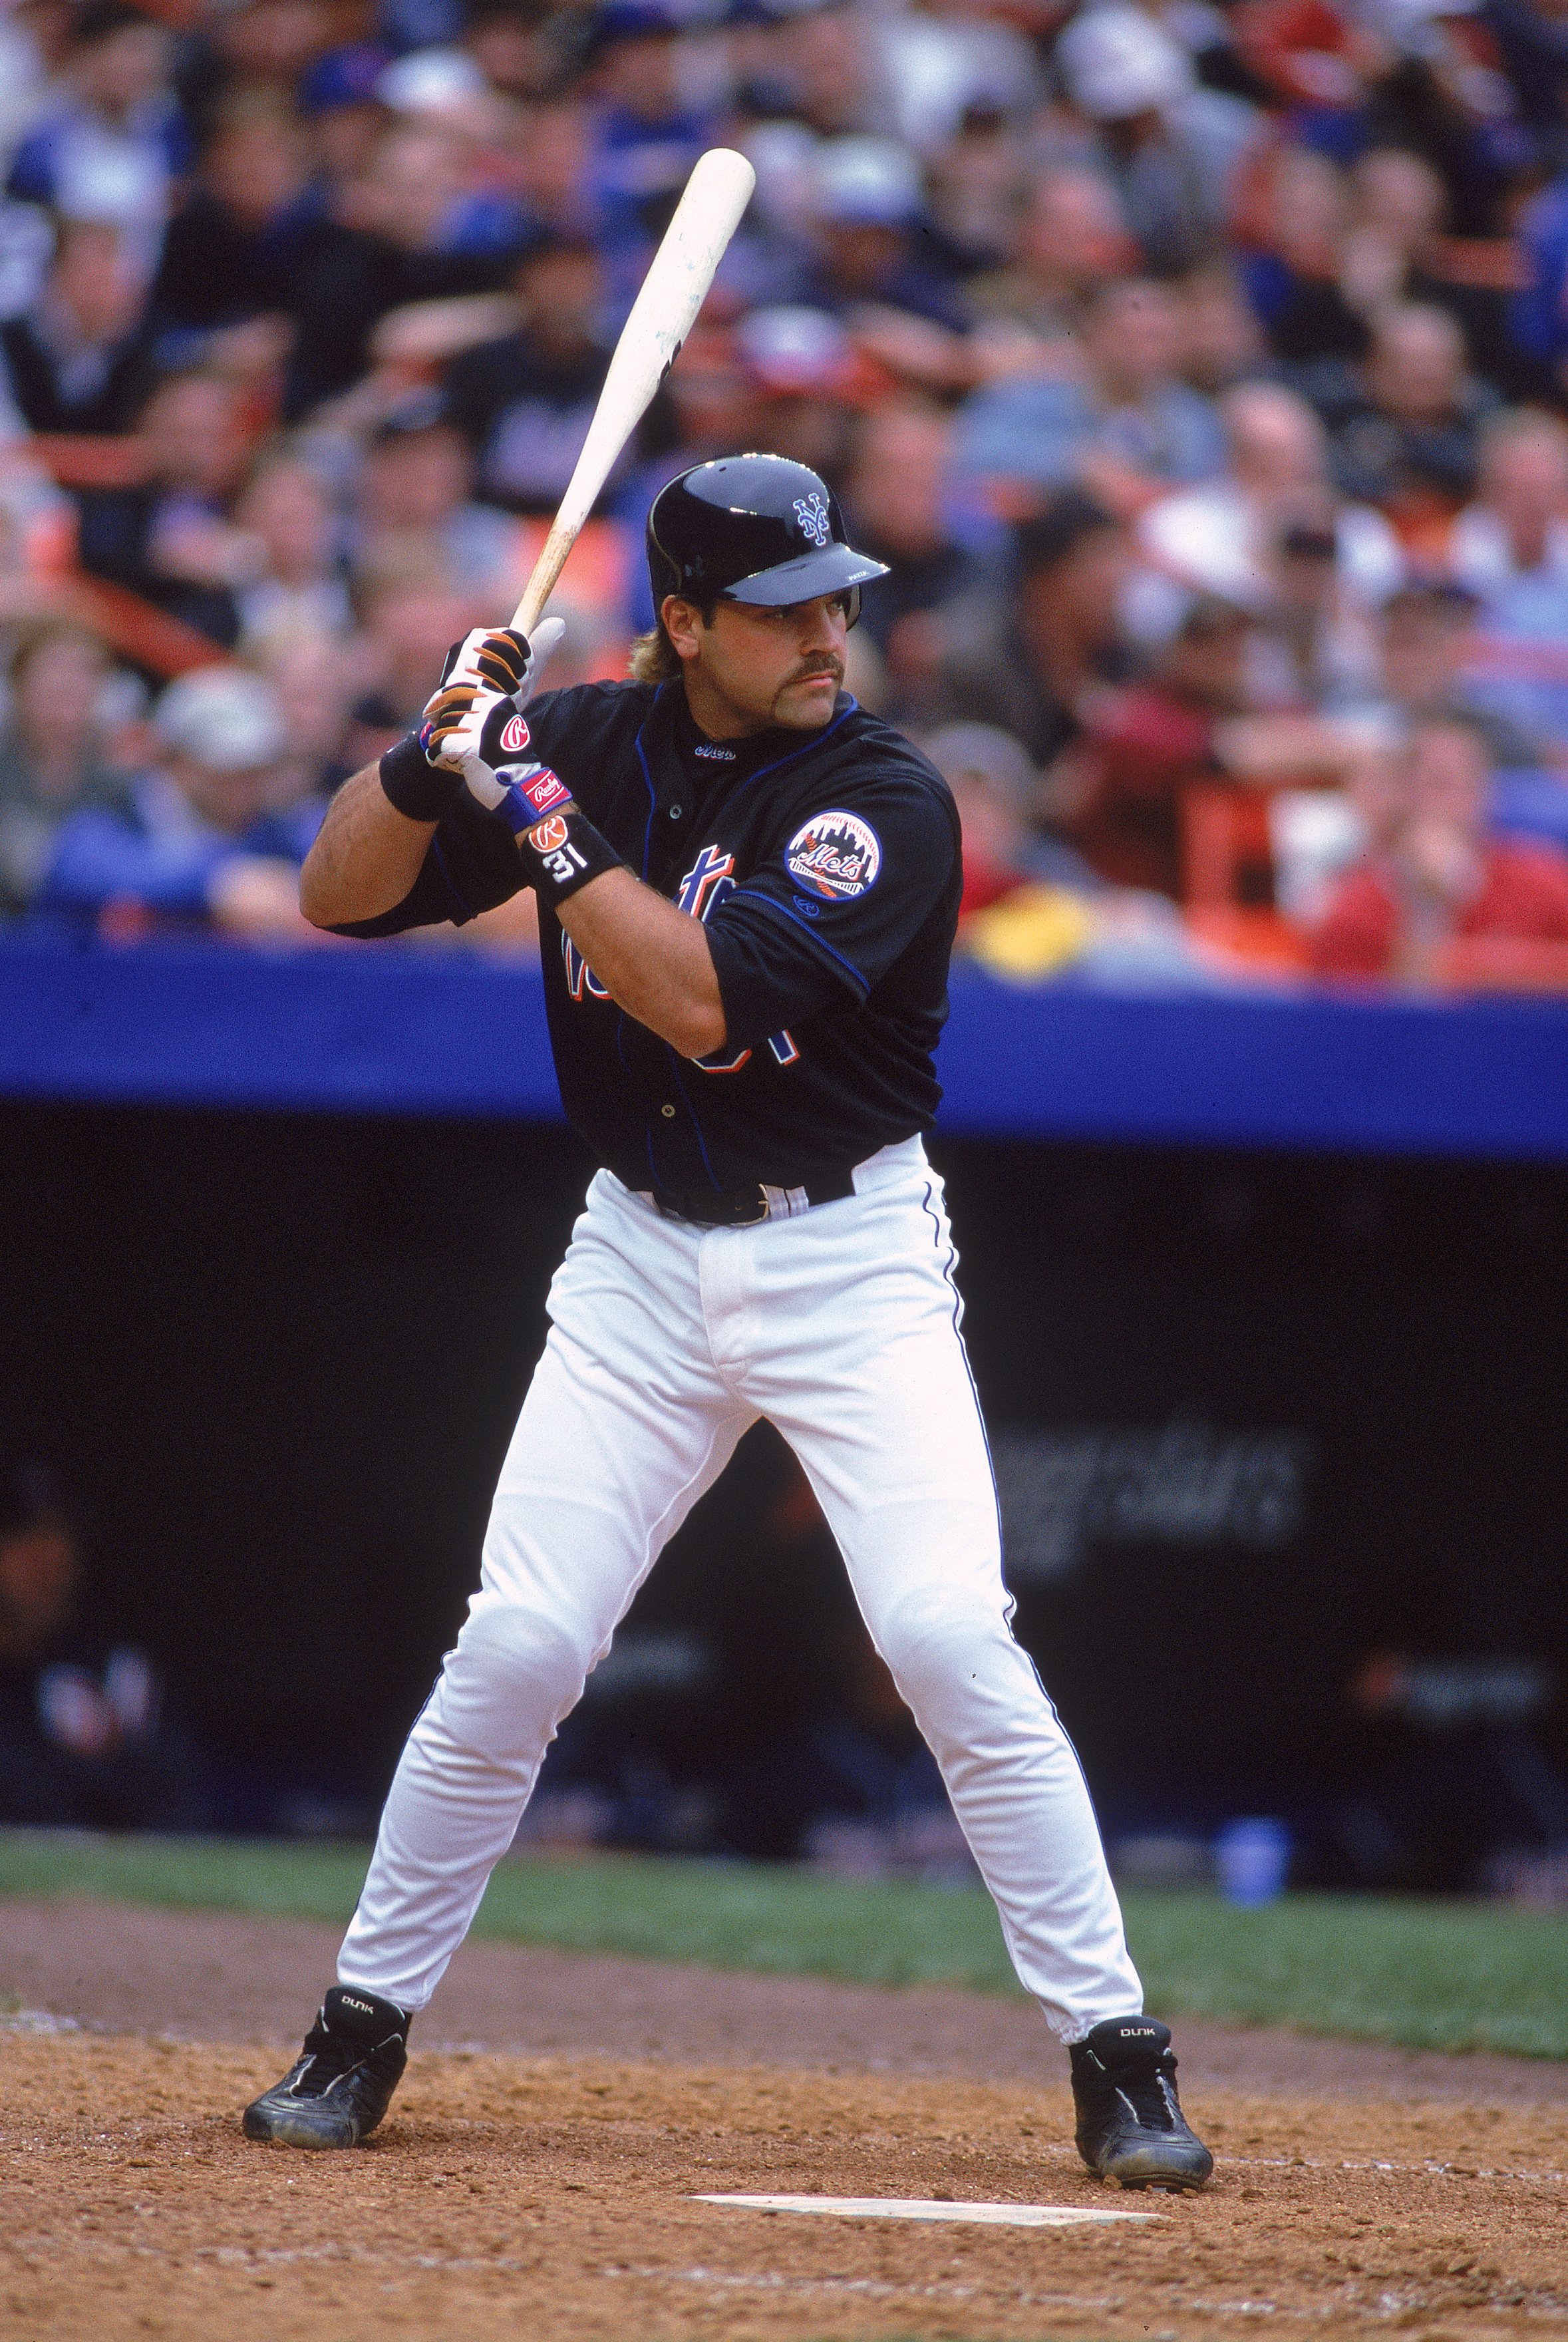 Mike Piazza's No. 31 retired by Mets